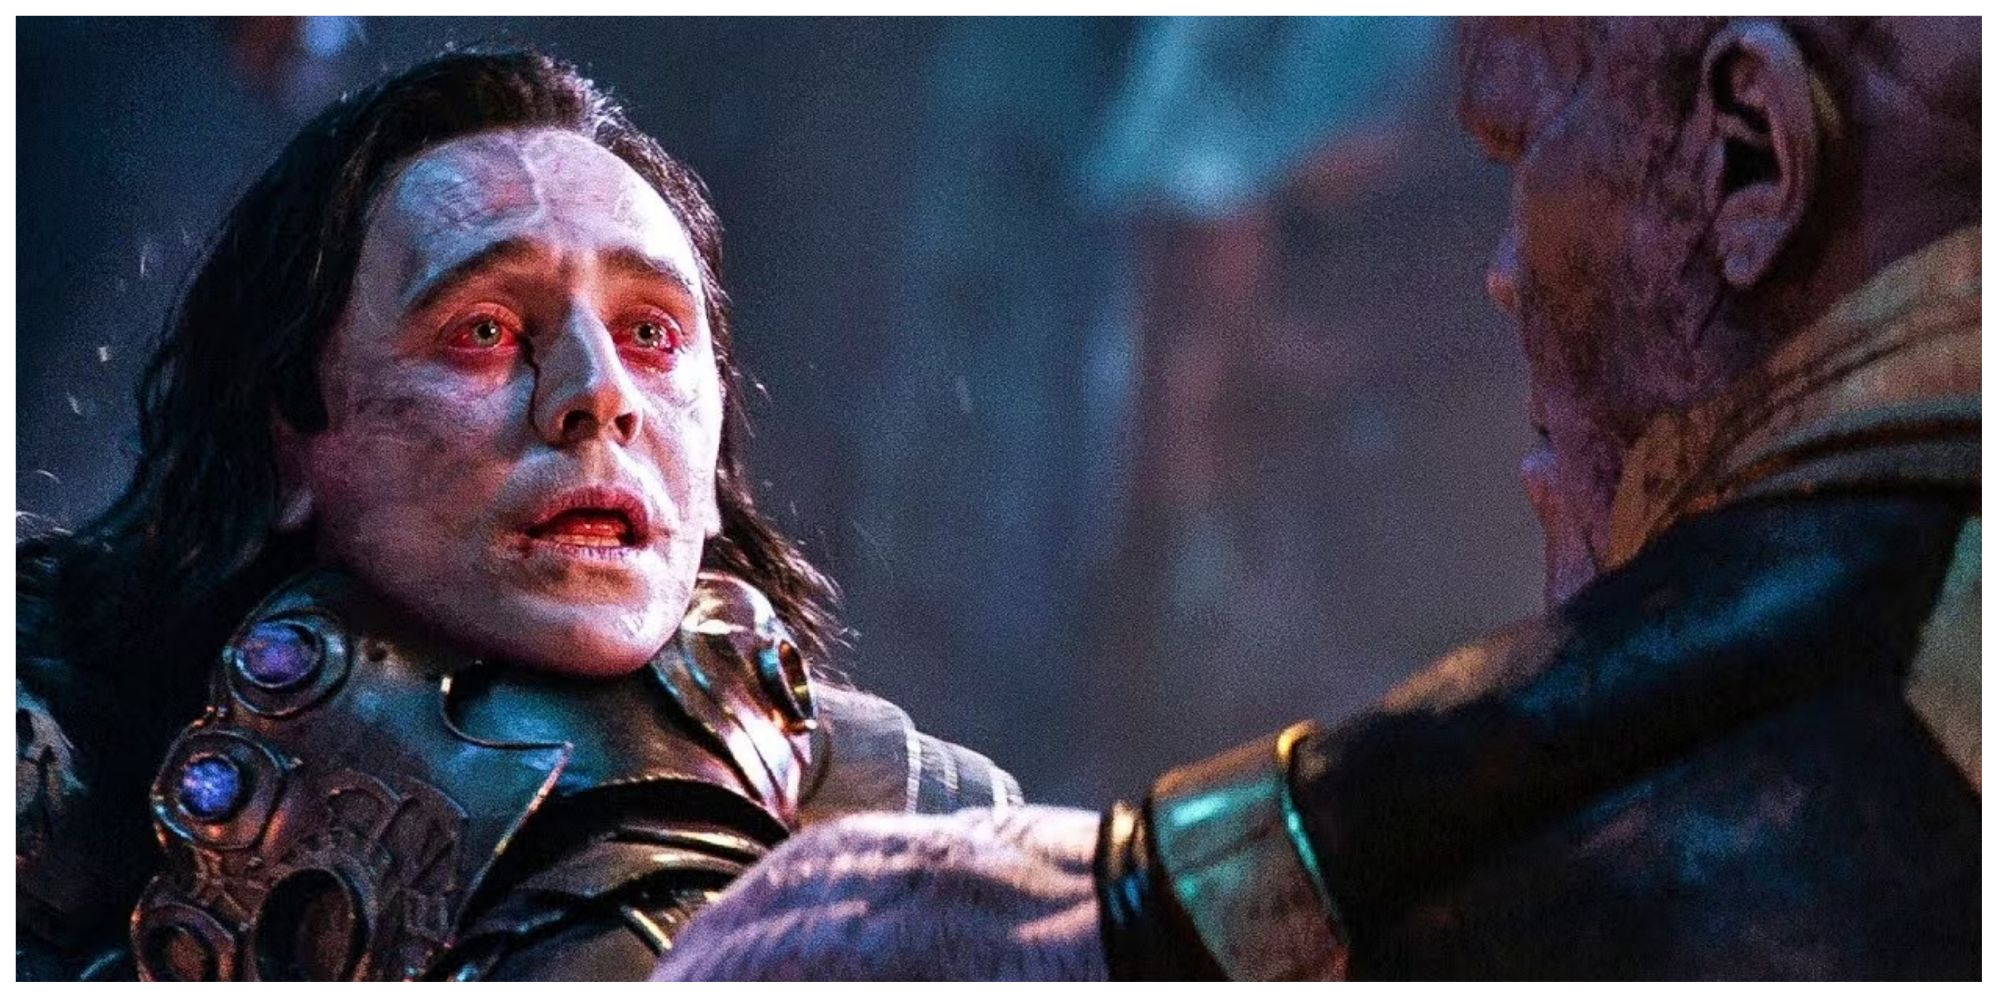 Loki's Death at the hands of Thanos